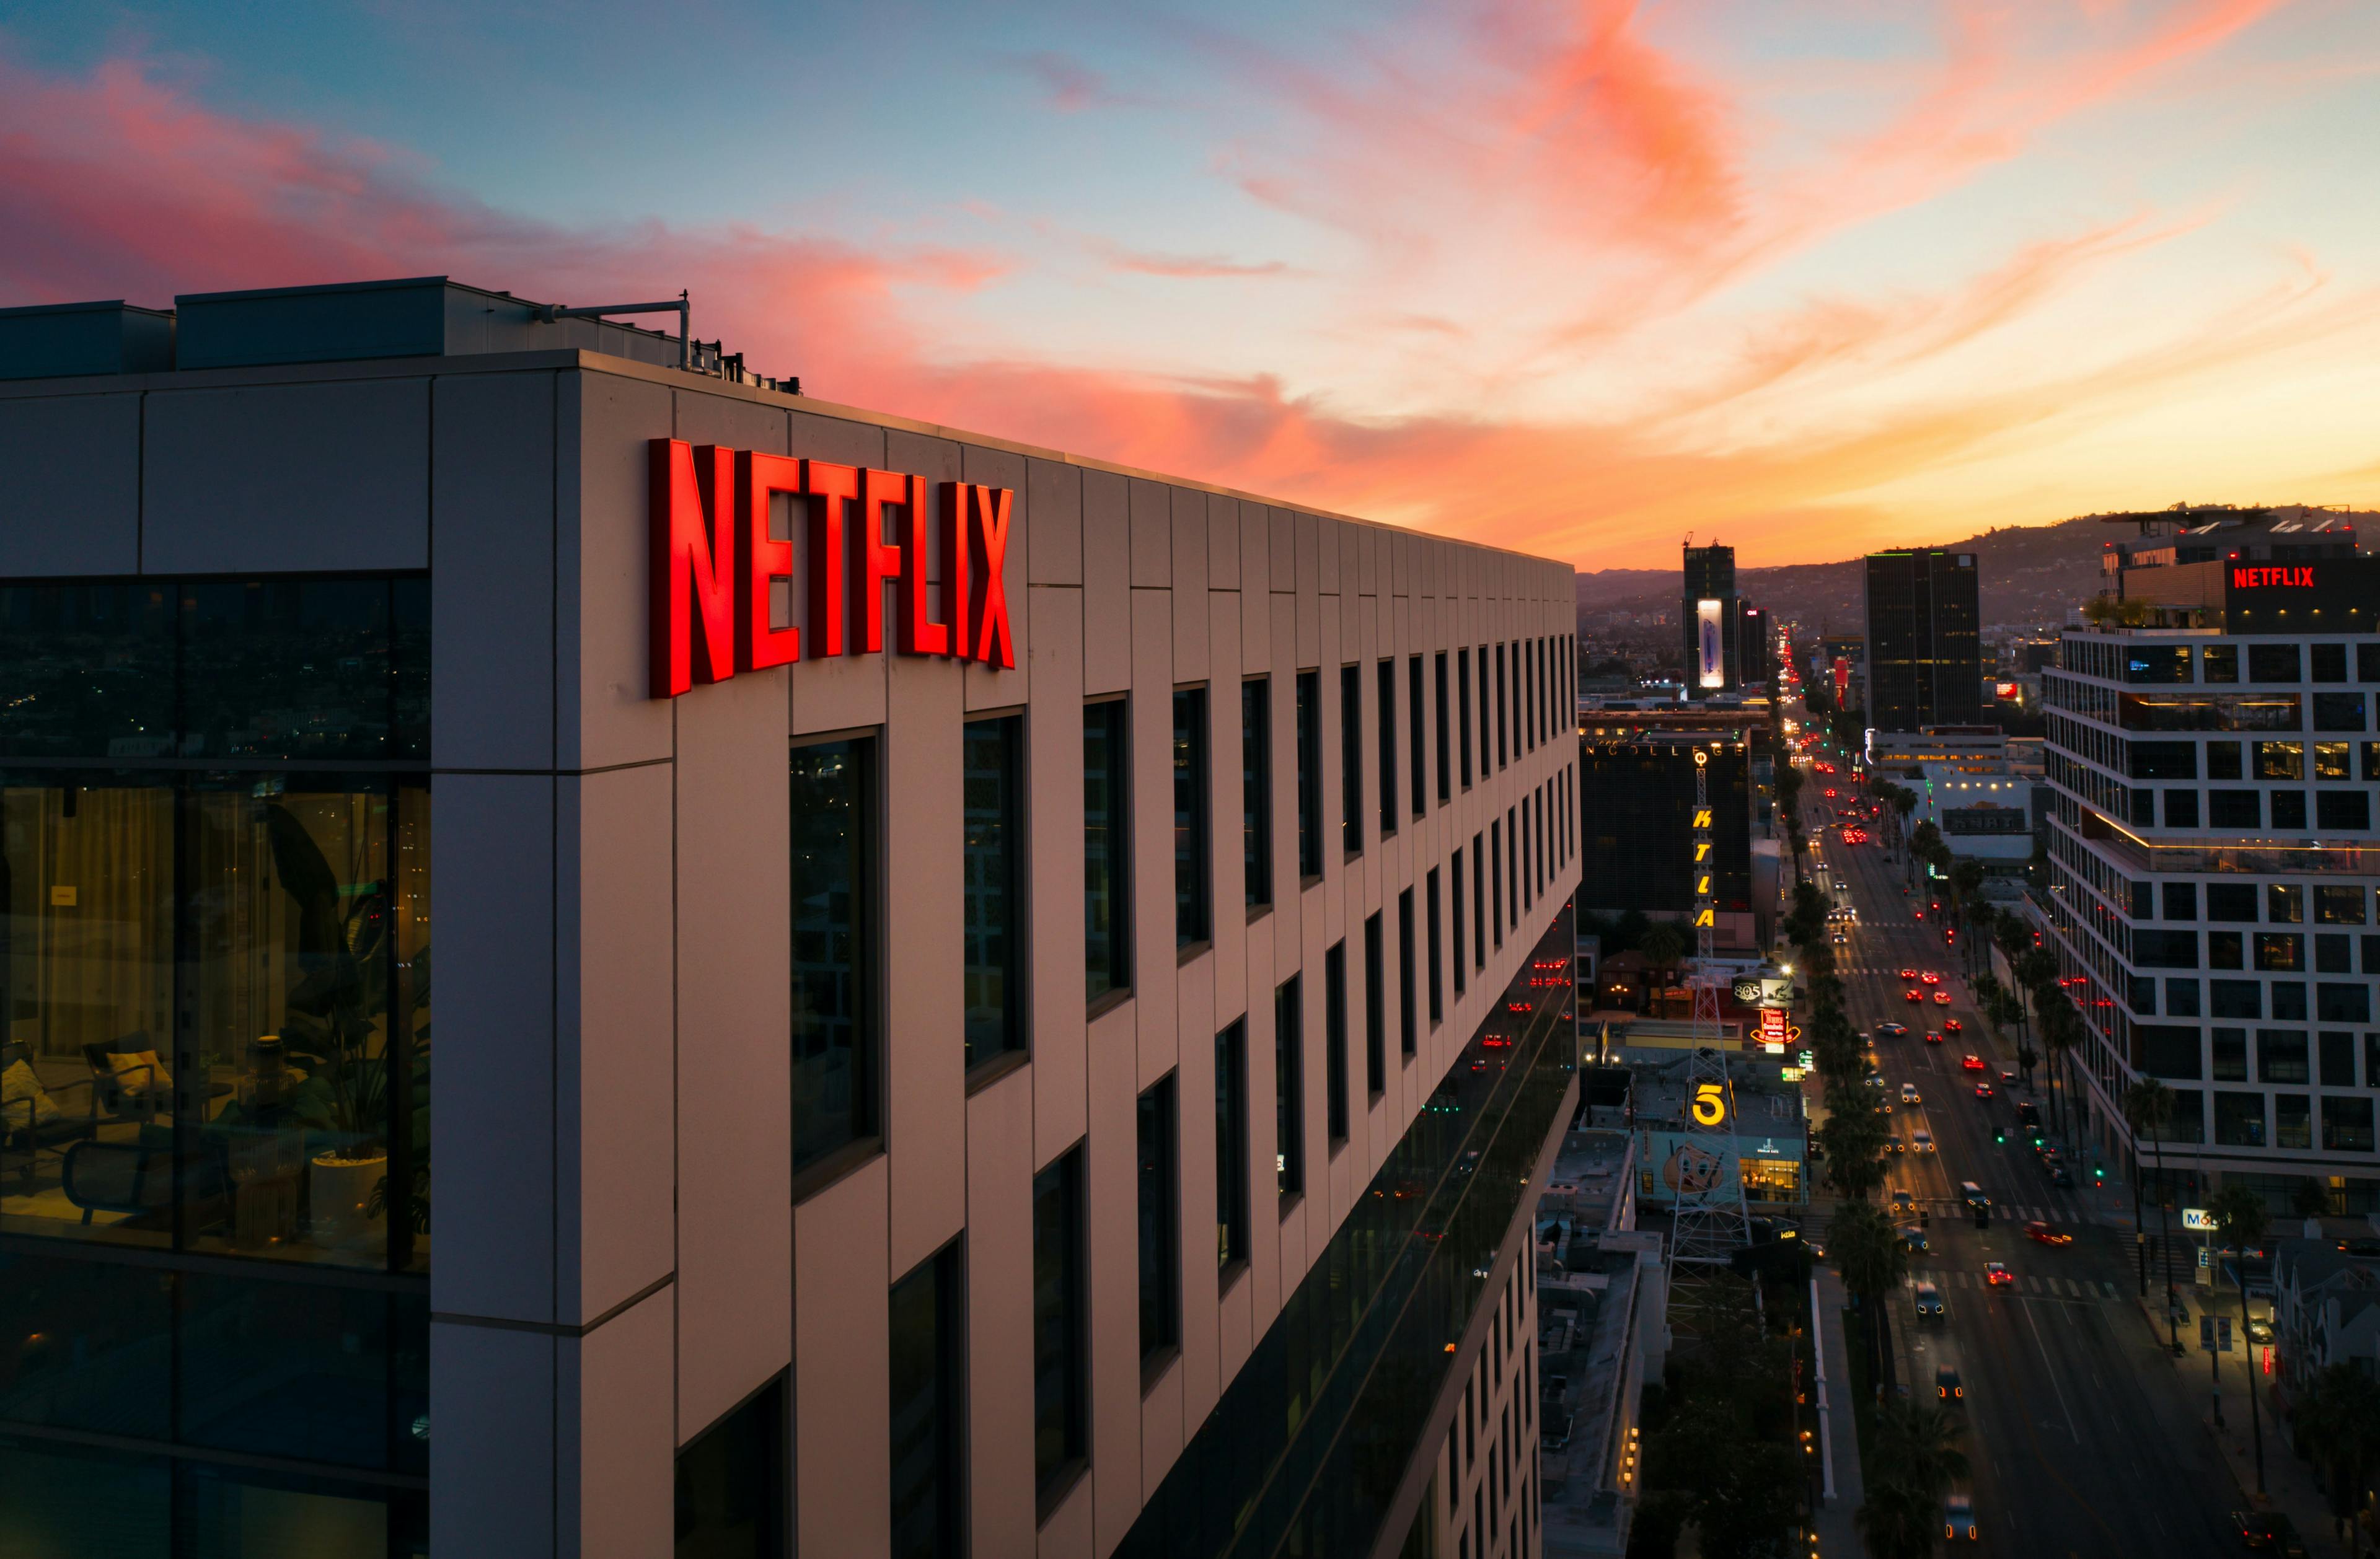 Netflix offices in Hollywood, Los Angeles with a sunset in the background